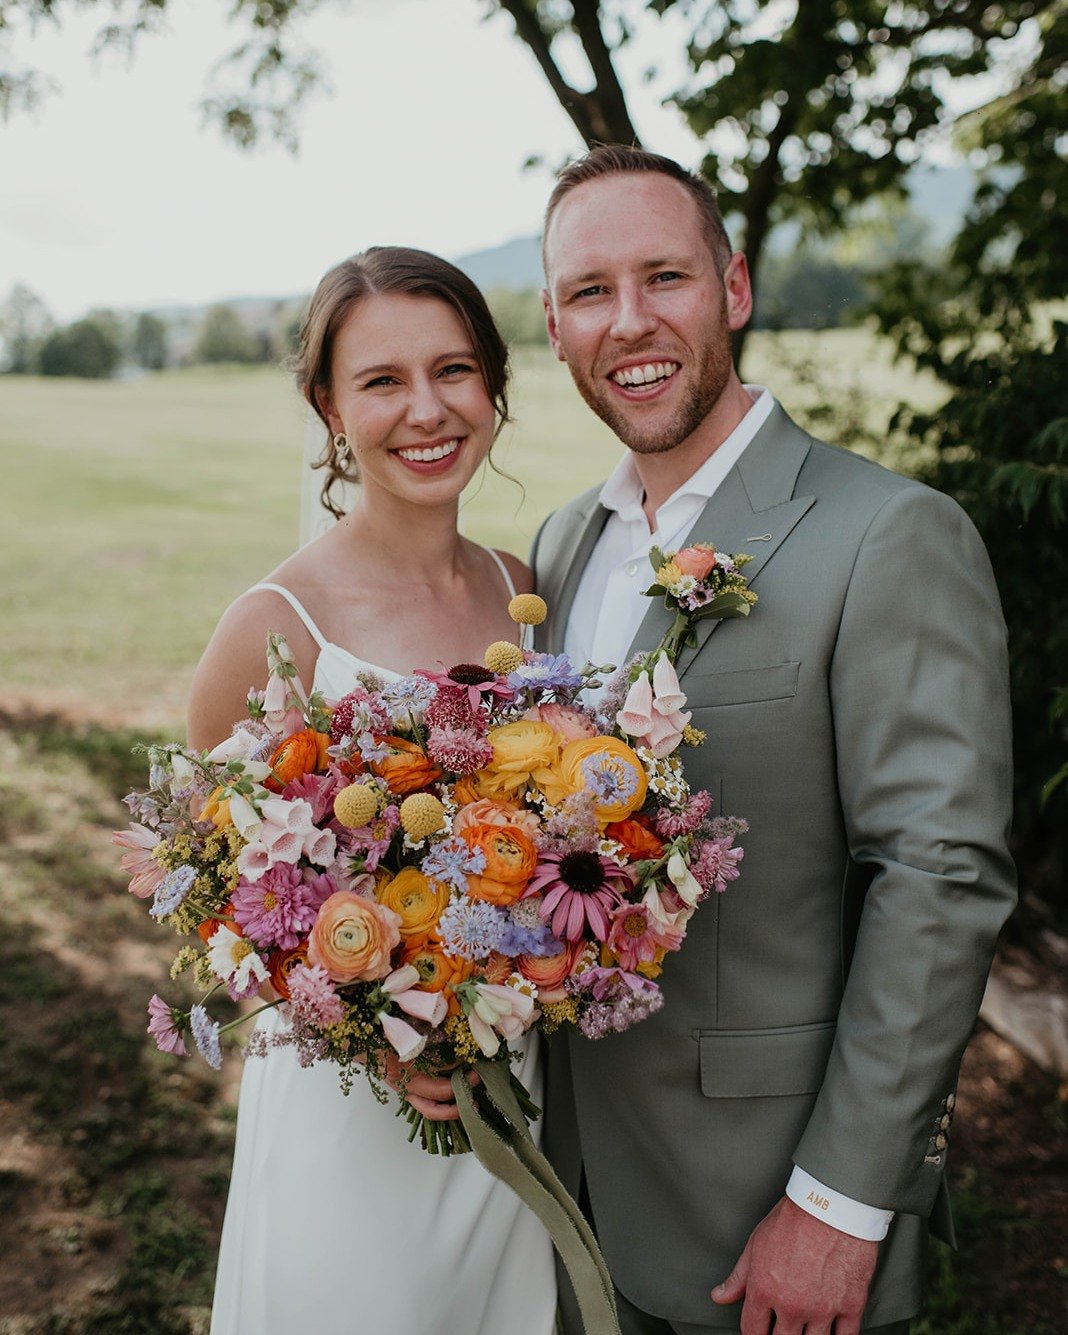 This wedding was a favorite of mine from 2023.  Partly because Hanna was a high school friend of mine (absolutely SO sweet, intelligent, and hilarious), partly because they got married on her family's gorgeous family property, and partly because of t